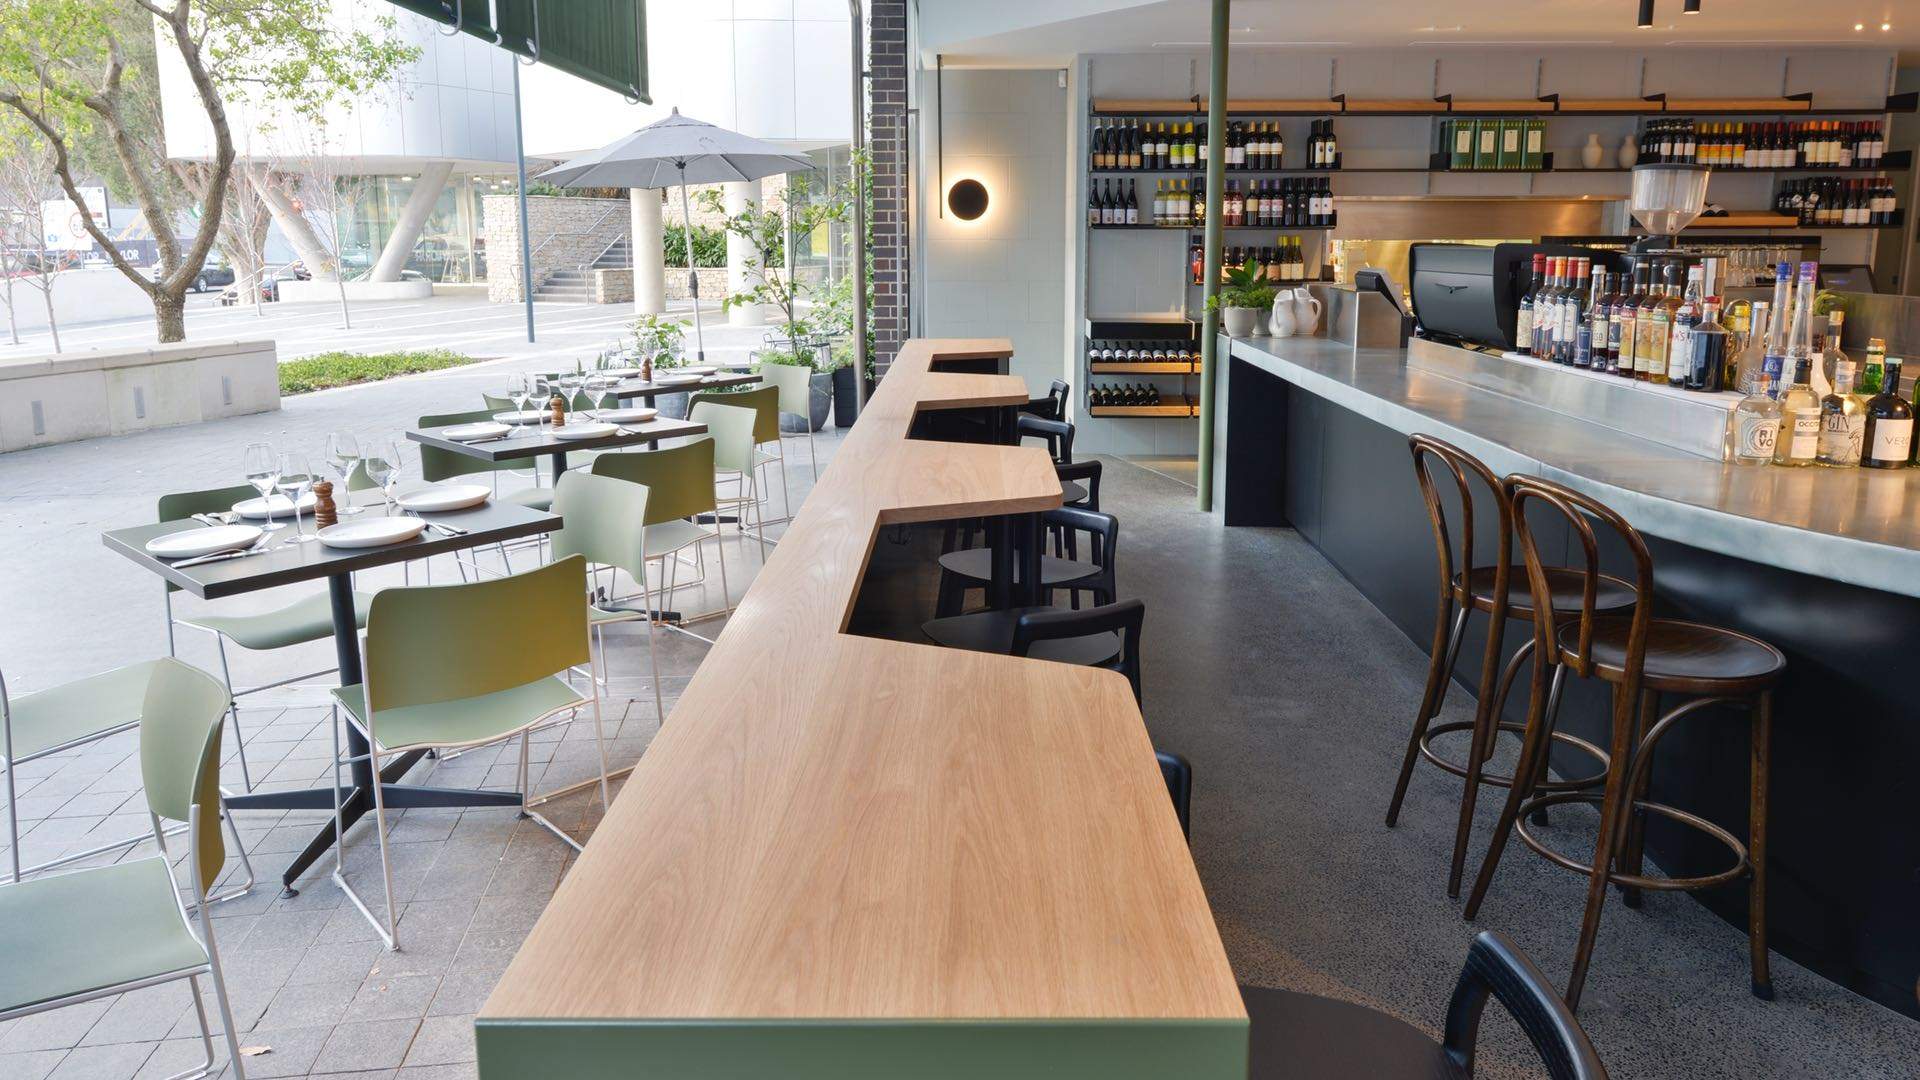 Rushcutters Bay's Popolo Is Now a Roman-Style Cucina, MARTA